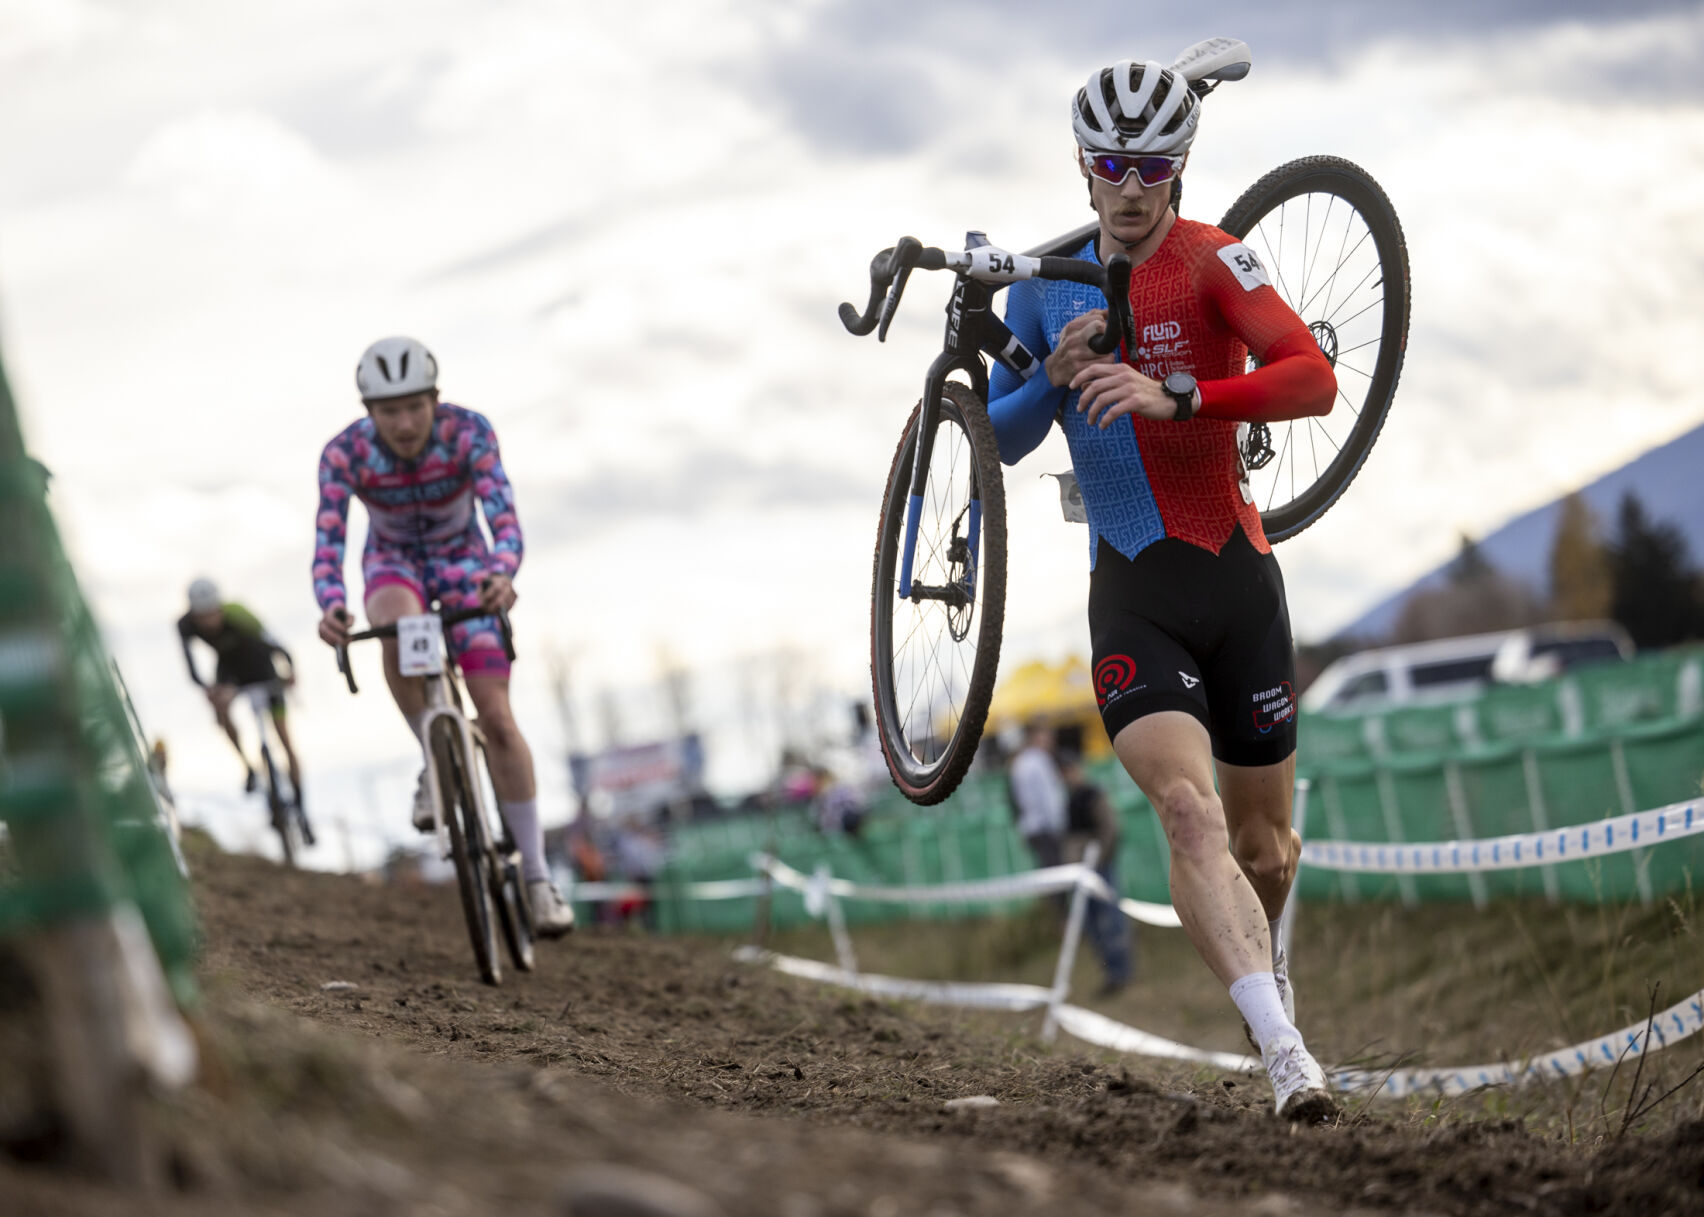 Riders compete for PanAmerican Cyclocross Championship